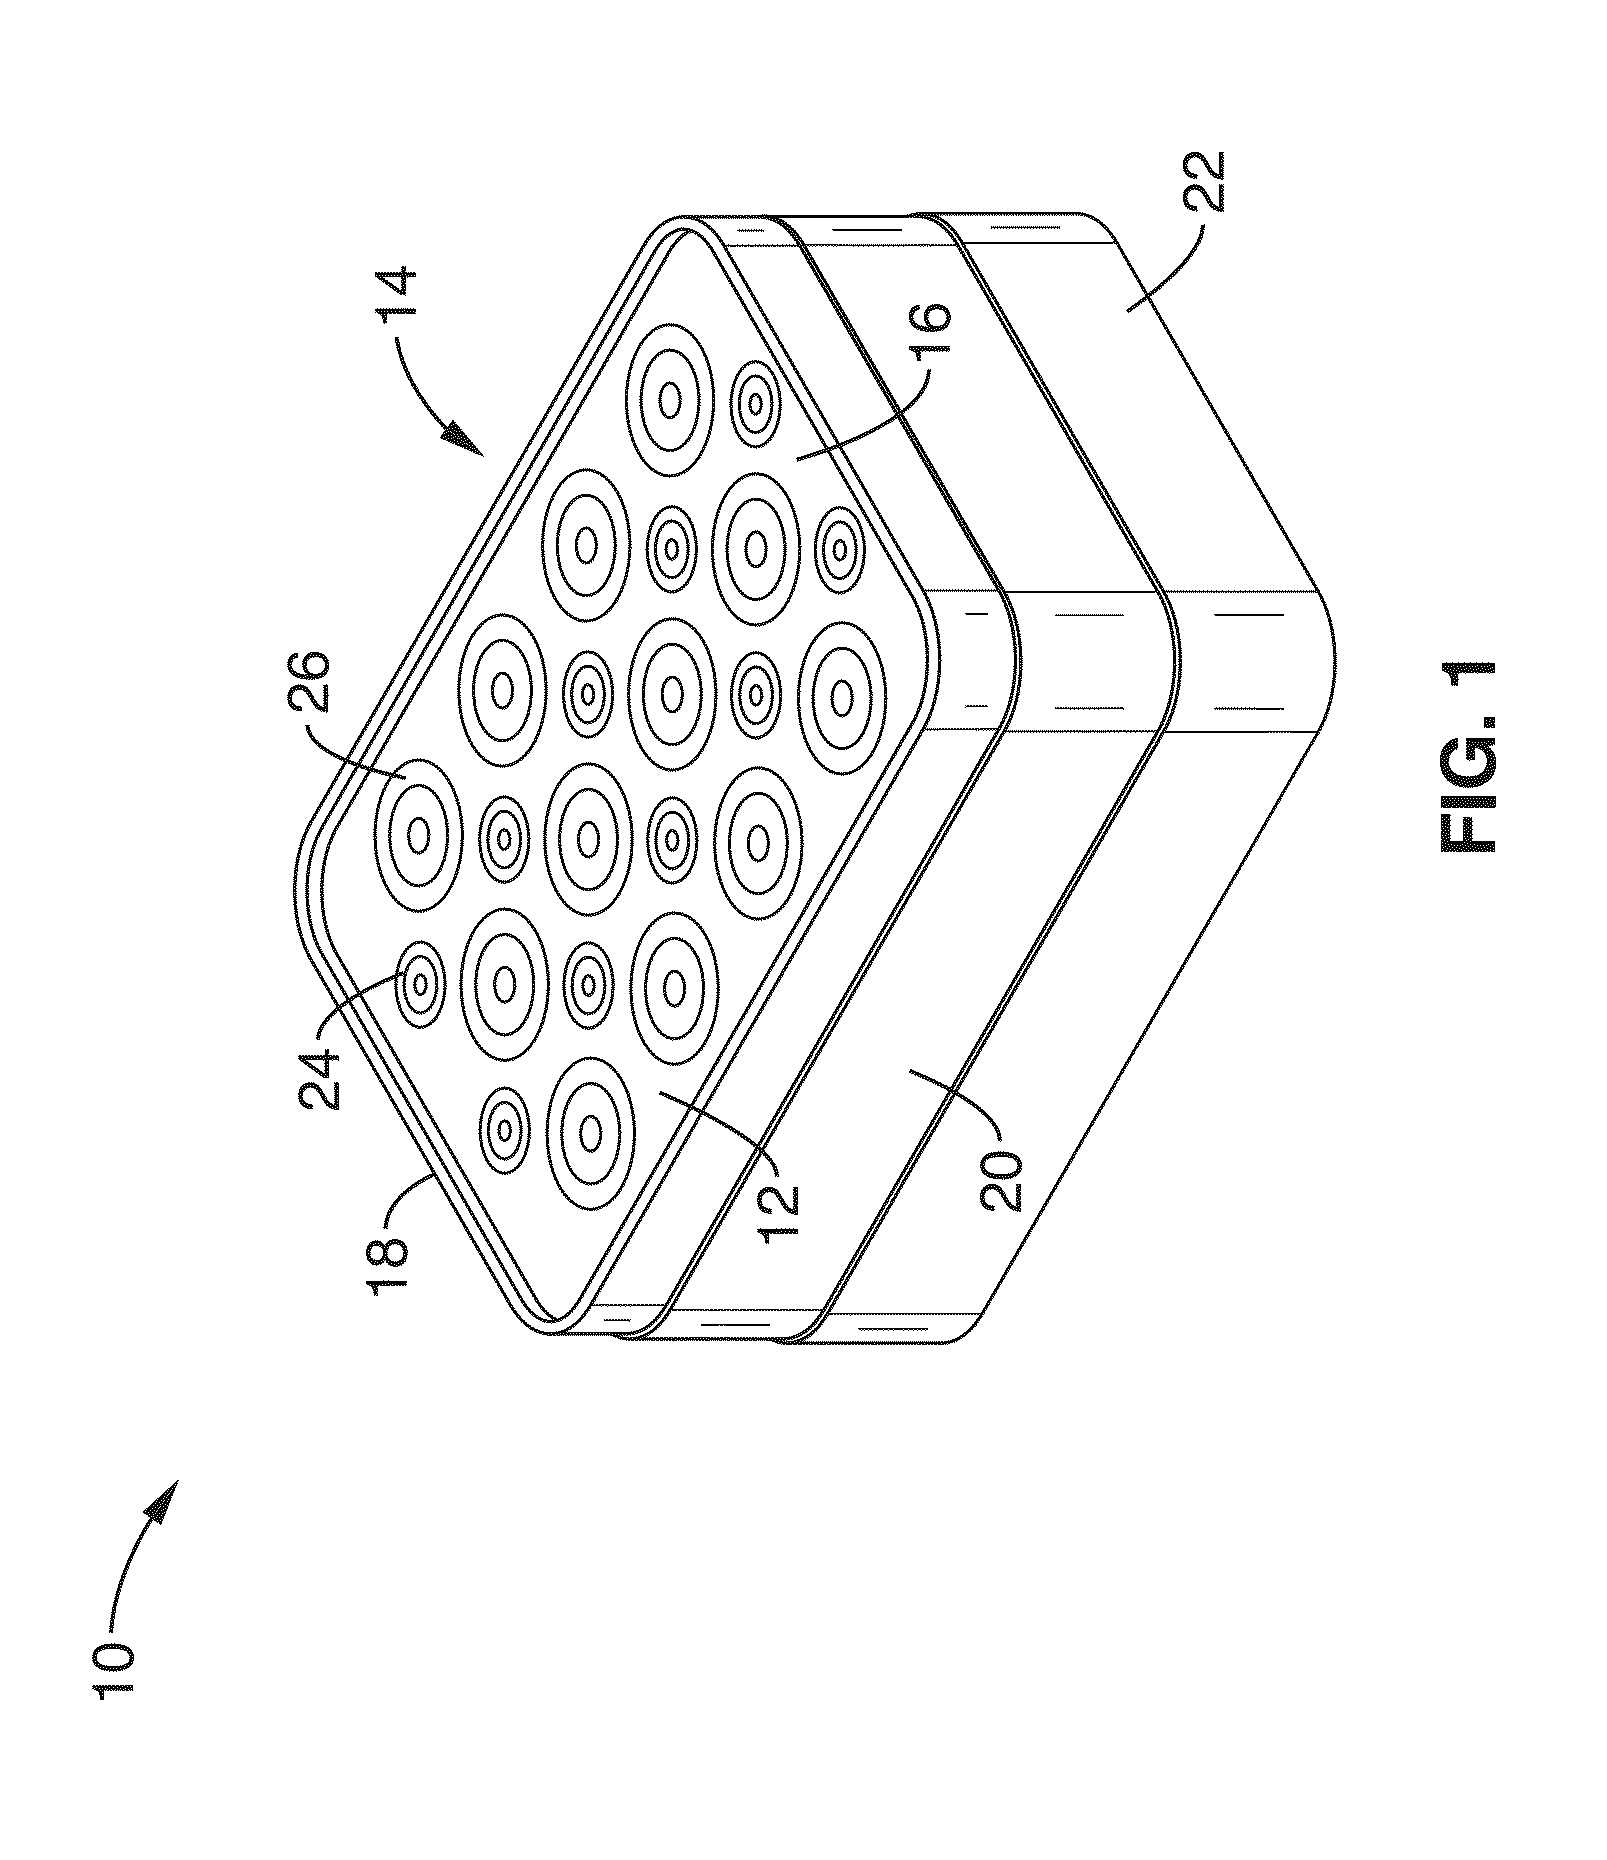 Sem scanner sensing apparatus, system and methodology for early detection of ulcers